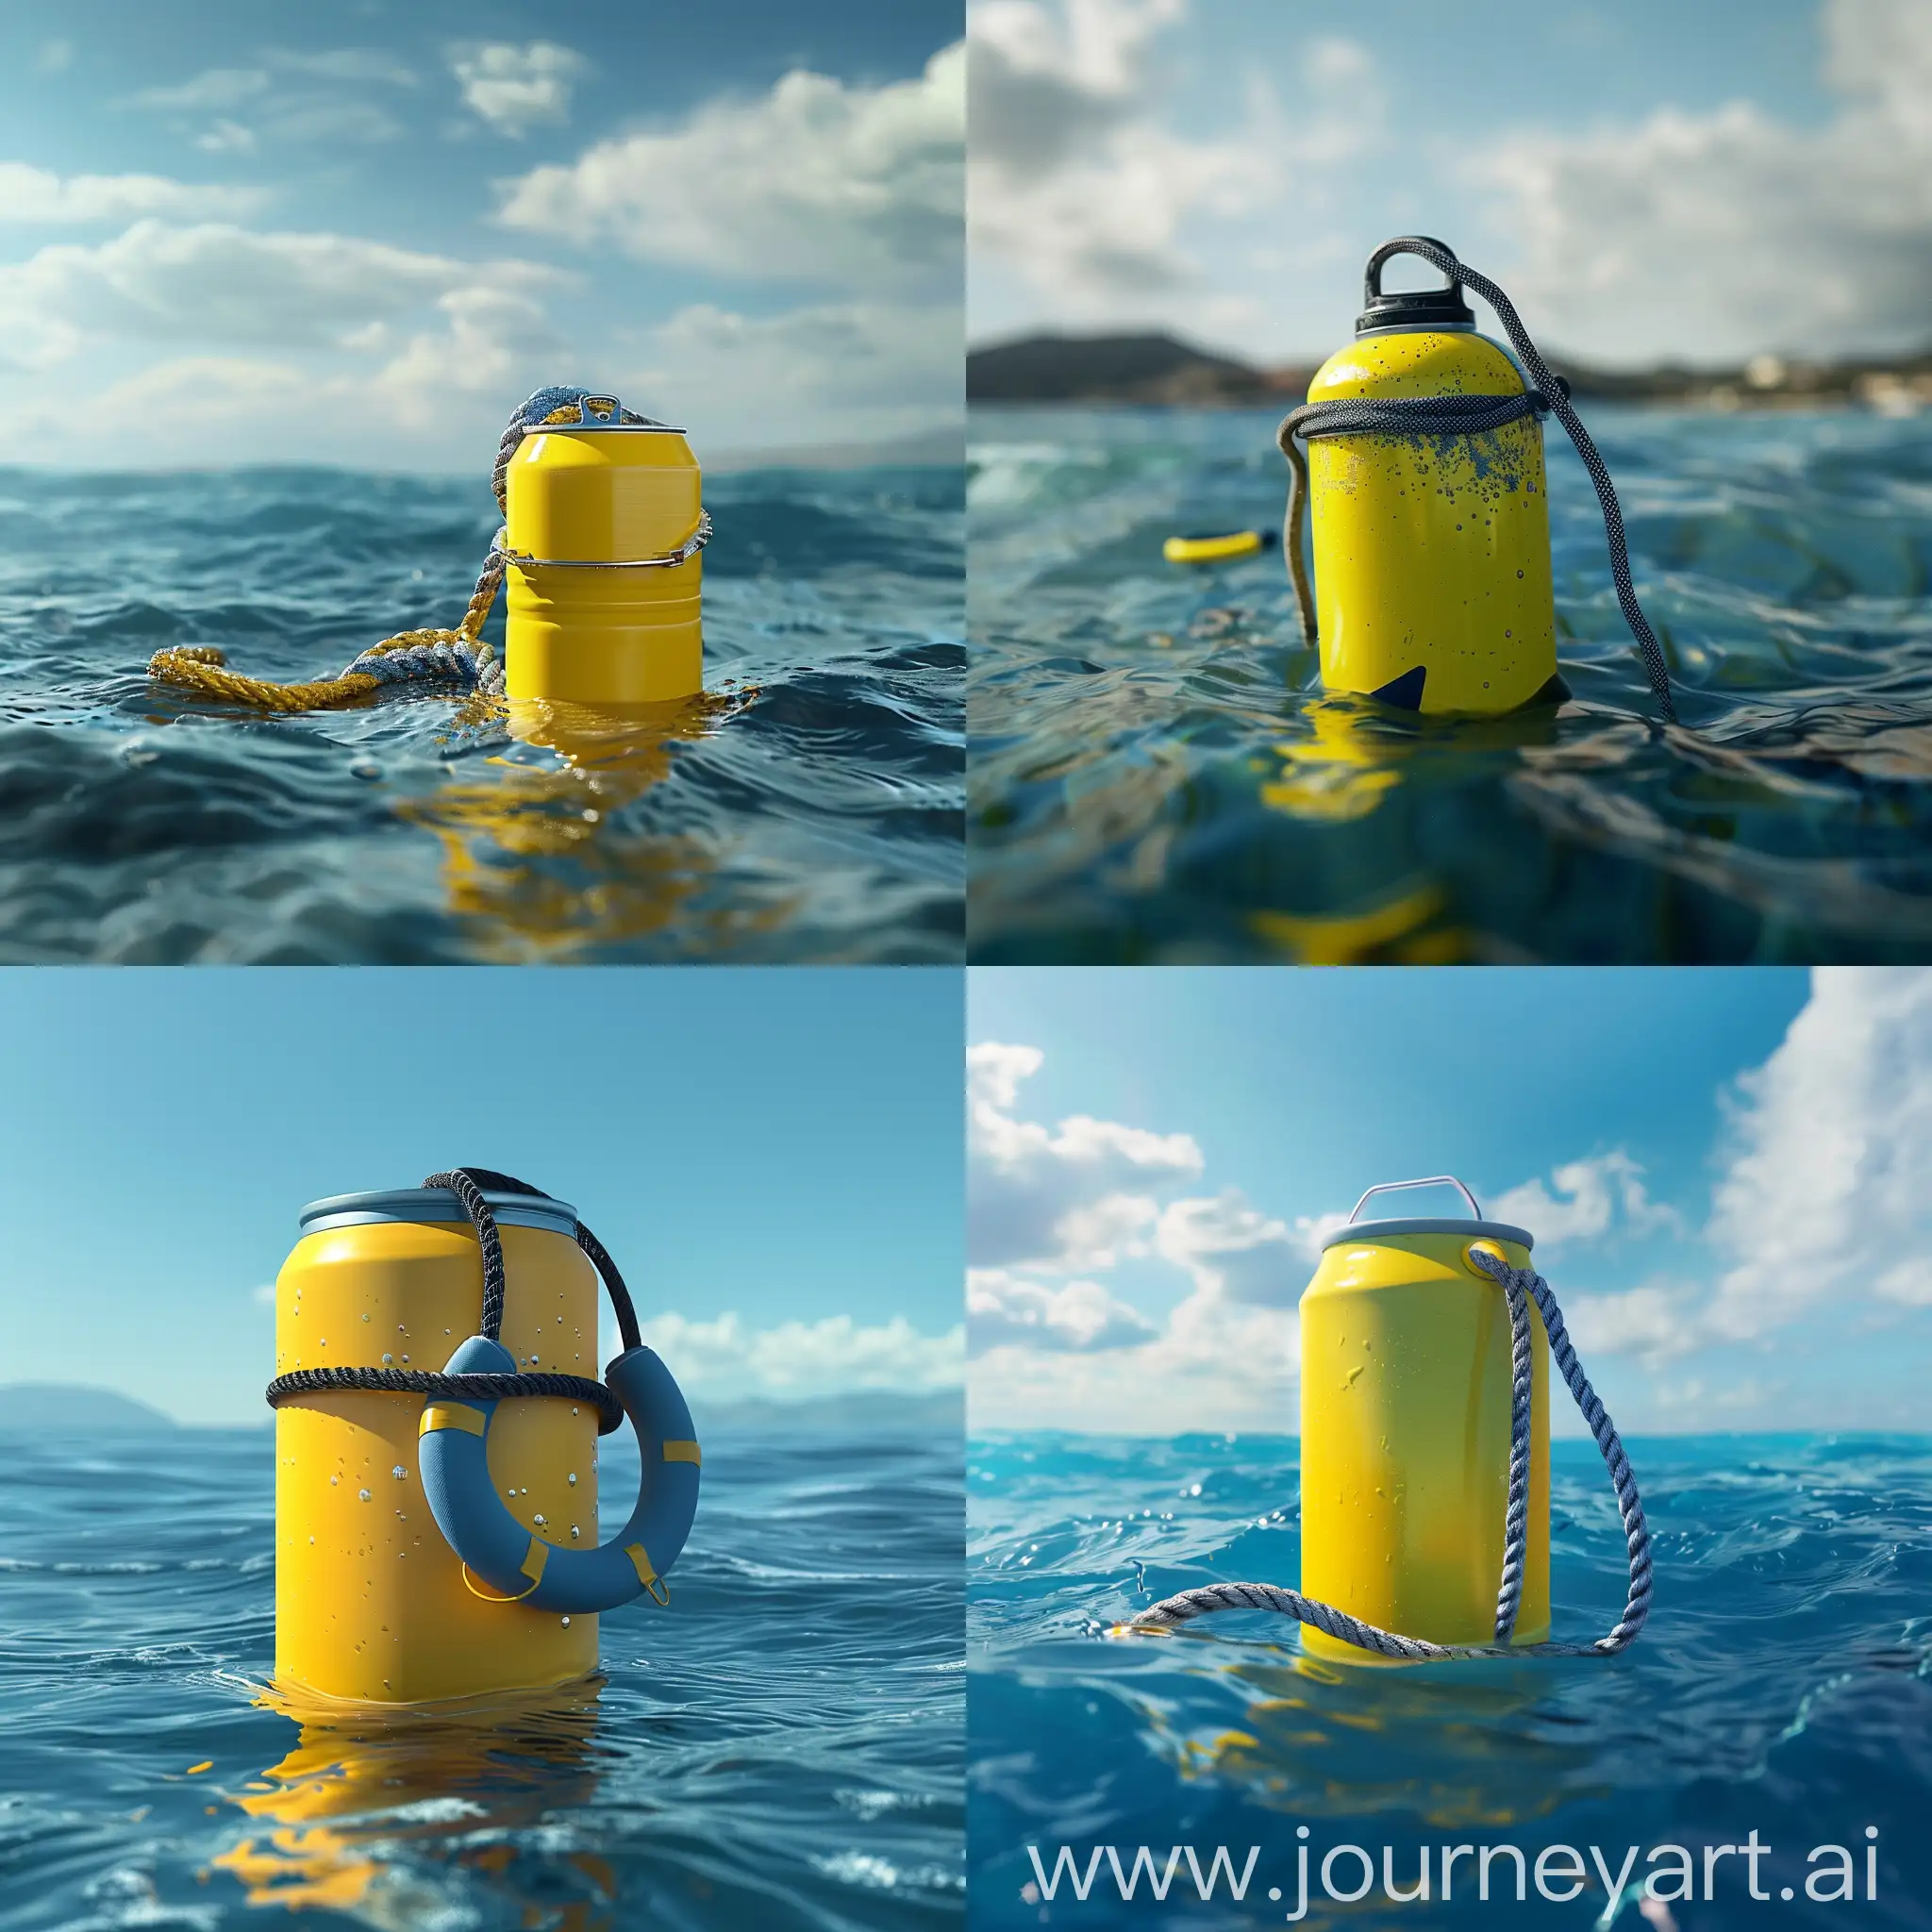  a simple yellow energy drink can in blue Lifebuoy in ocean Emergency lifesaver buoy in water. Saving Lives . Lifeguard equipment with rope floating in sea. photorealistic